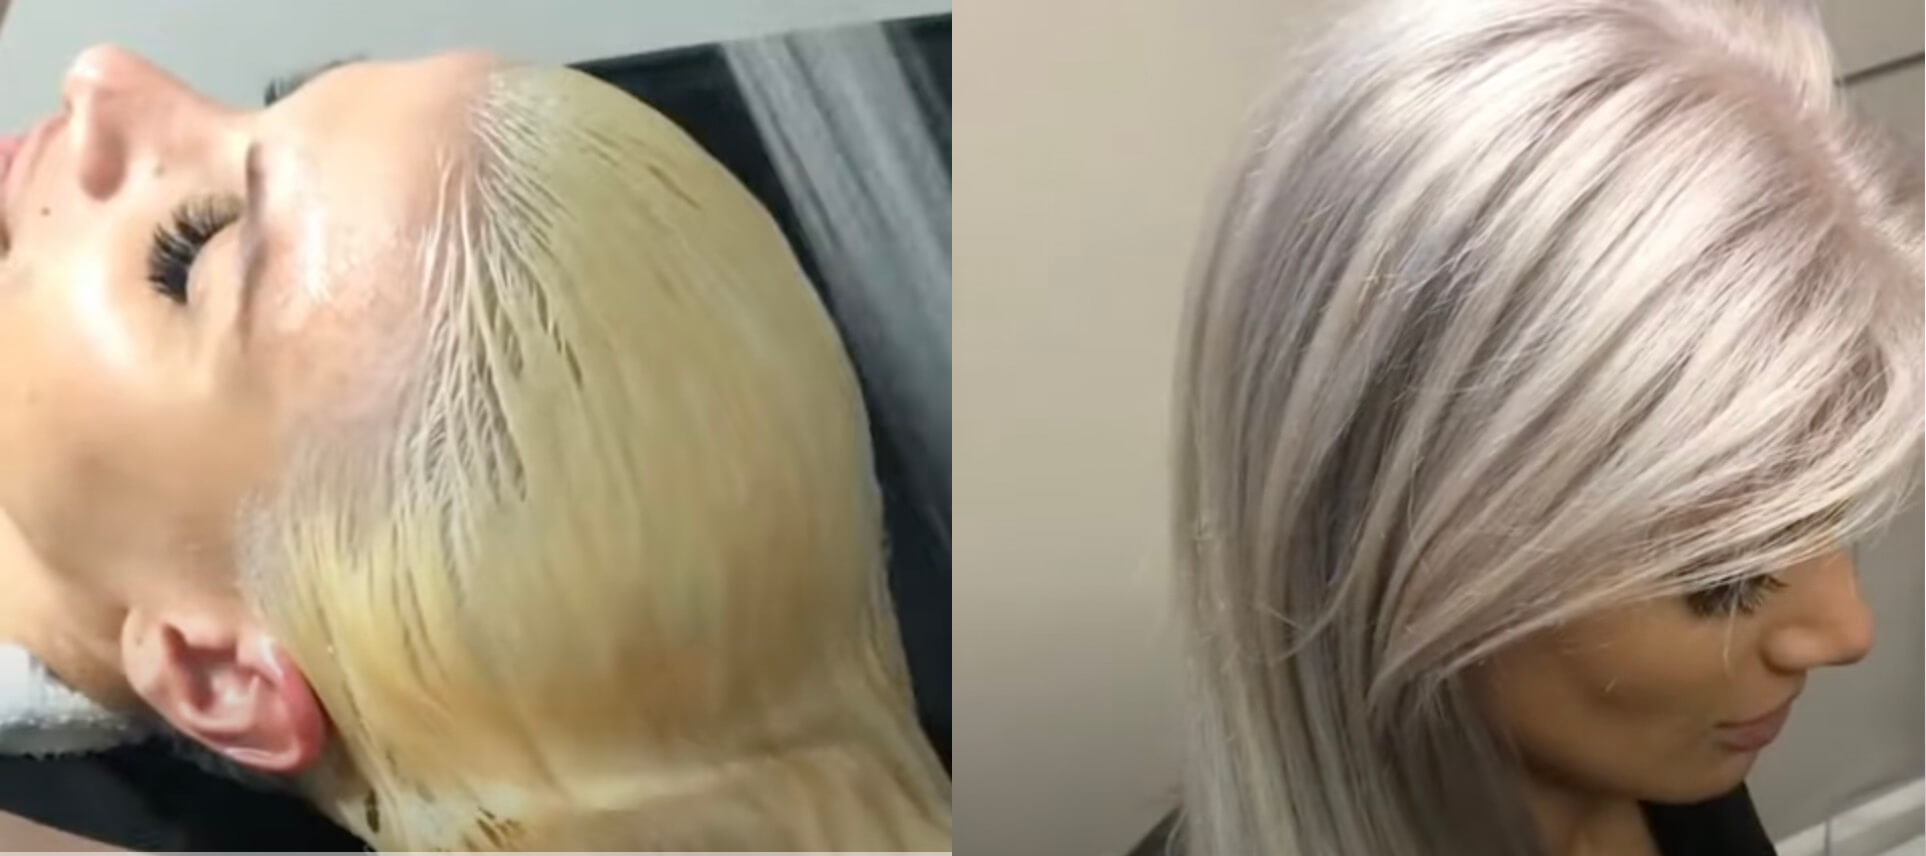 How To Tone Yellow Hair Step By Step Explanation With Pictures Ugly Duckling